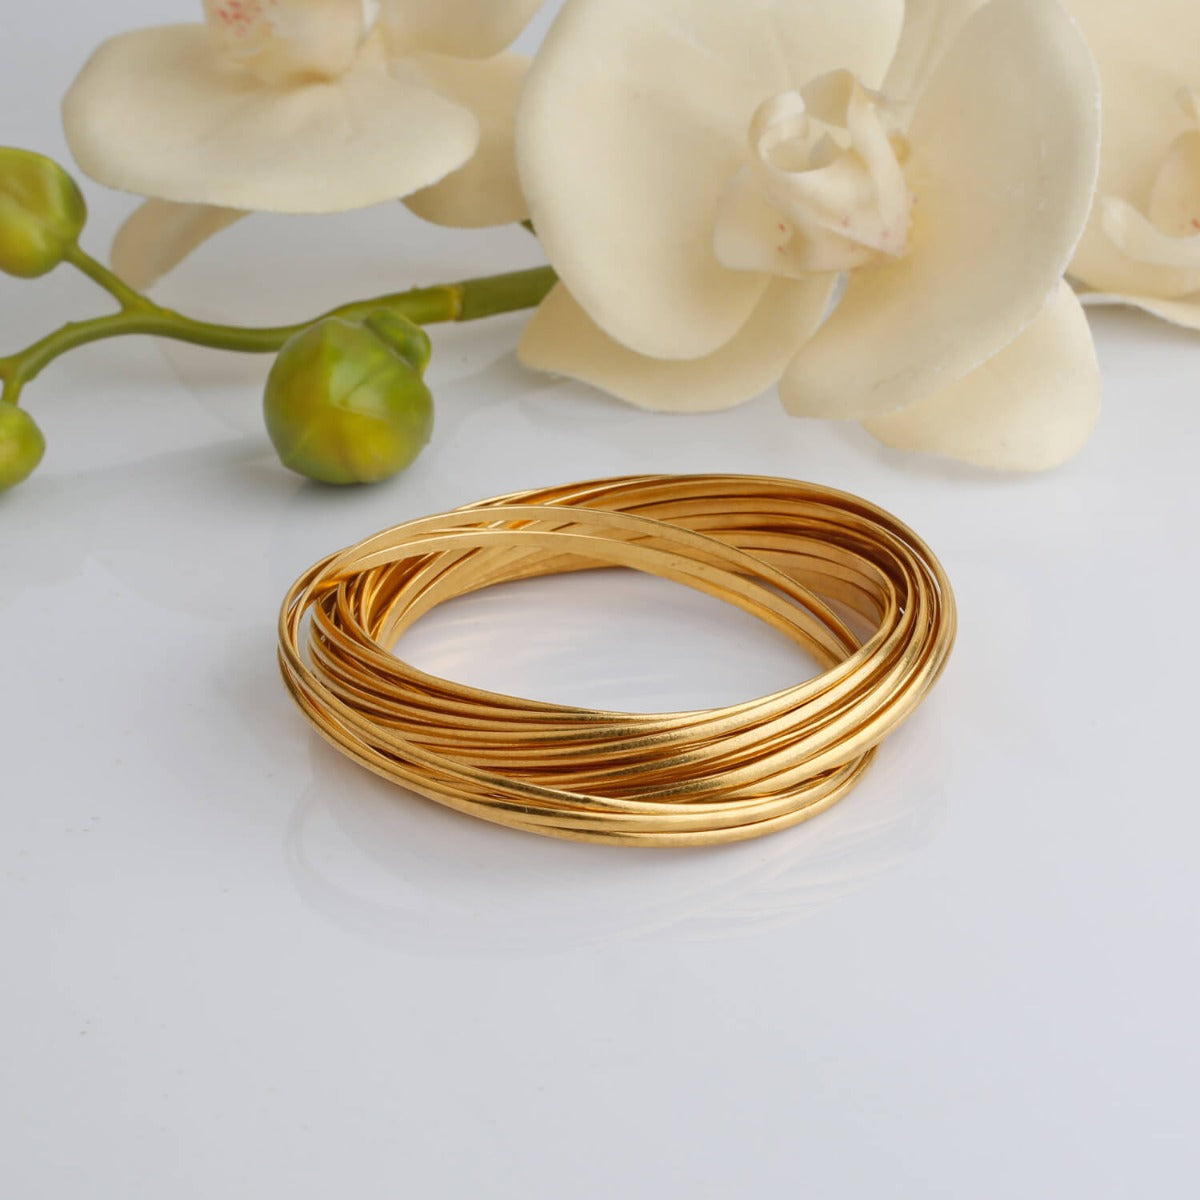 Charming gold plated silver interlinked  bangle